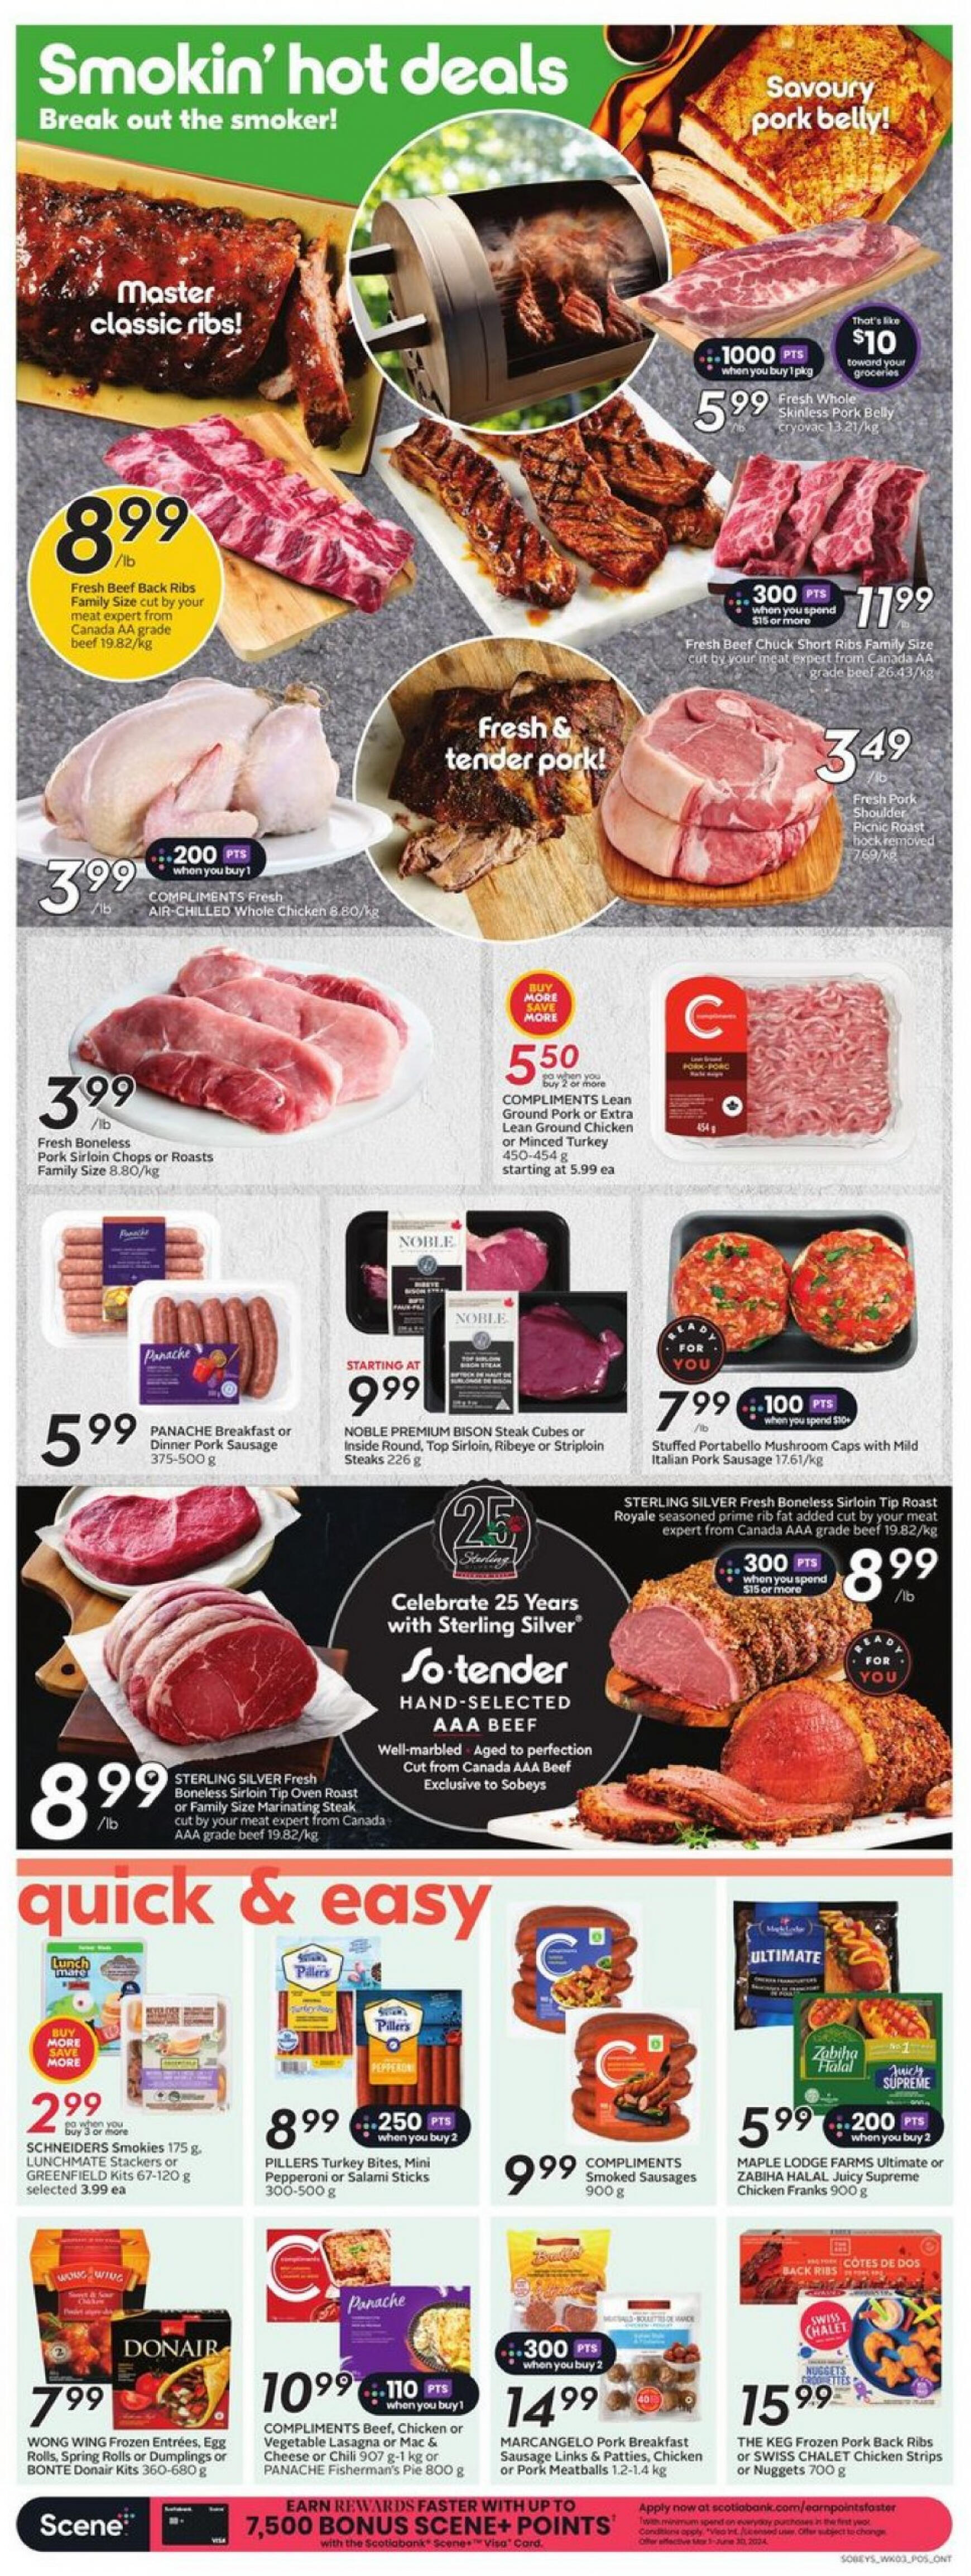 sobeys - Sobeys - Weekly Flyer - Ontario flyer current 16.05. - 22.05. - page: 10